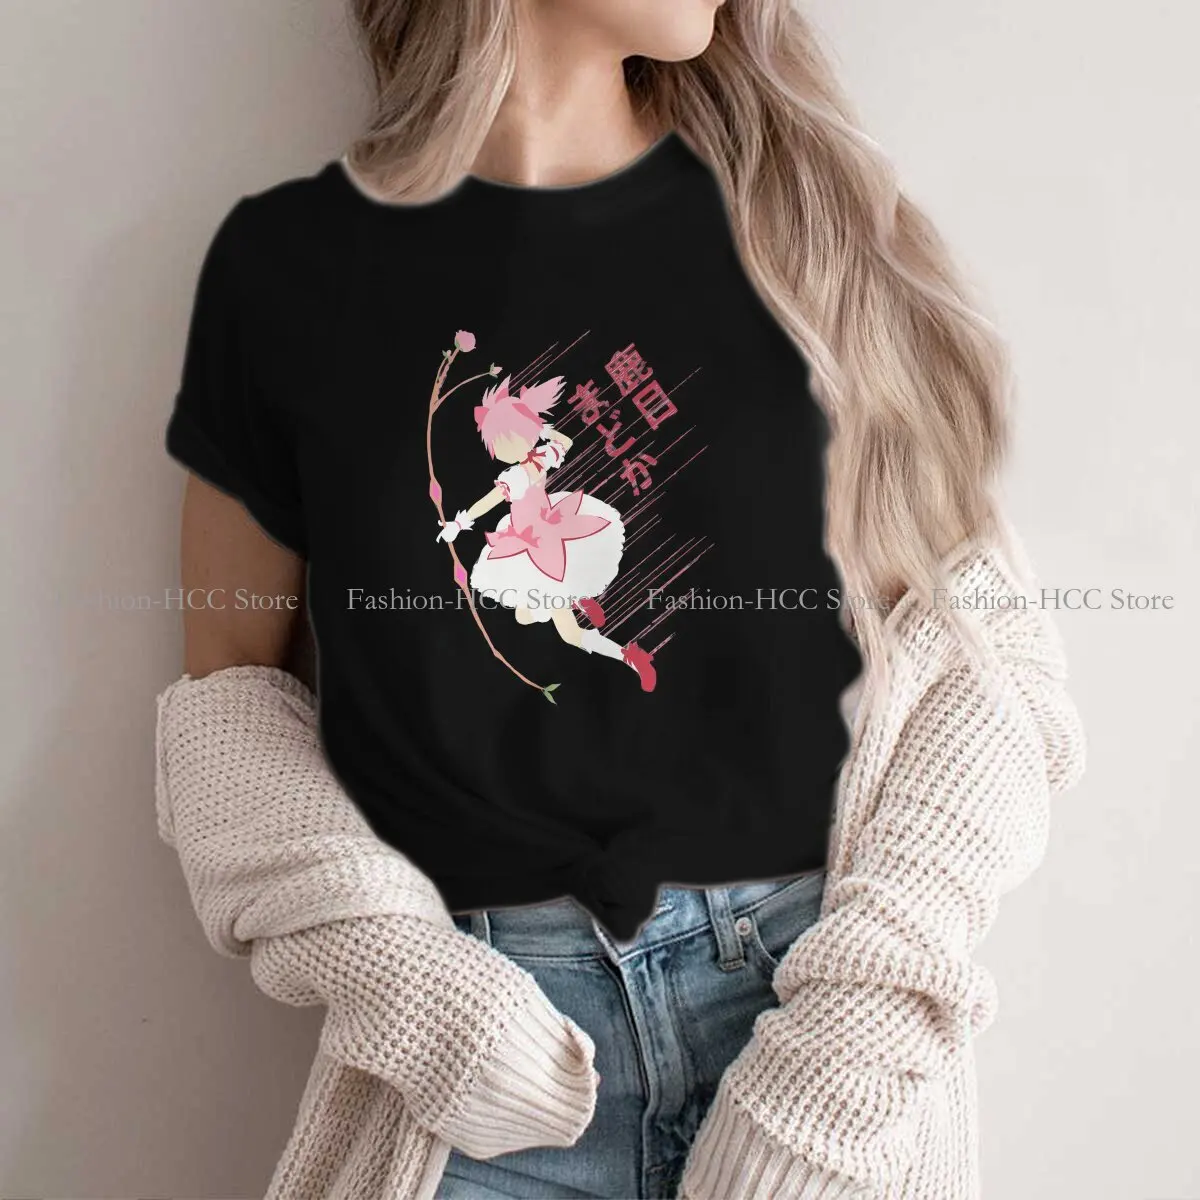 

Puella Magi Madoka Magica Anime Polyester TShirts Mens Funny Awesome For Music Fans Classic Print Homme T Shirt Hipster Clothing